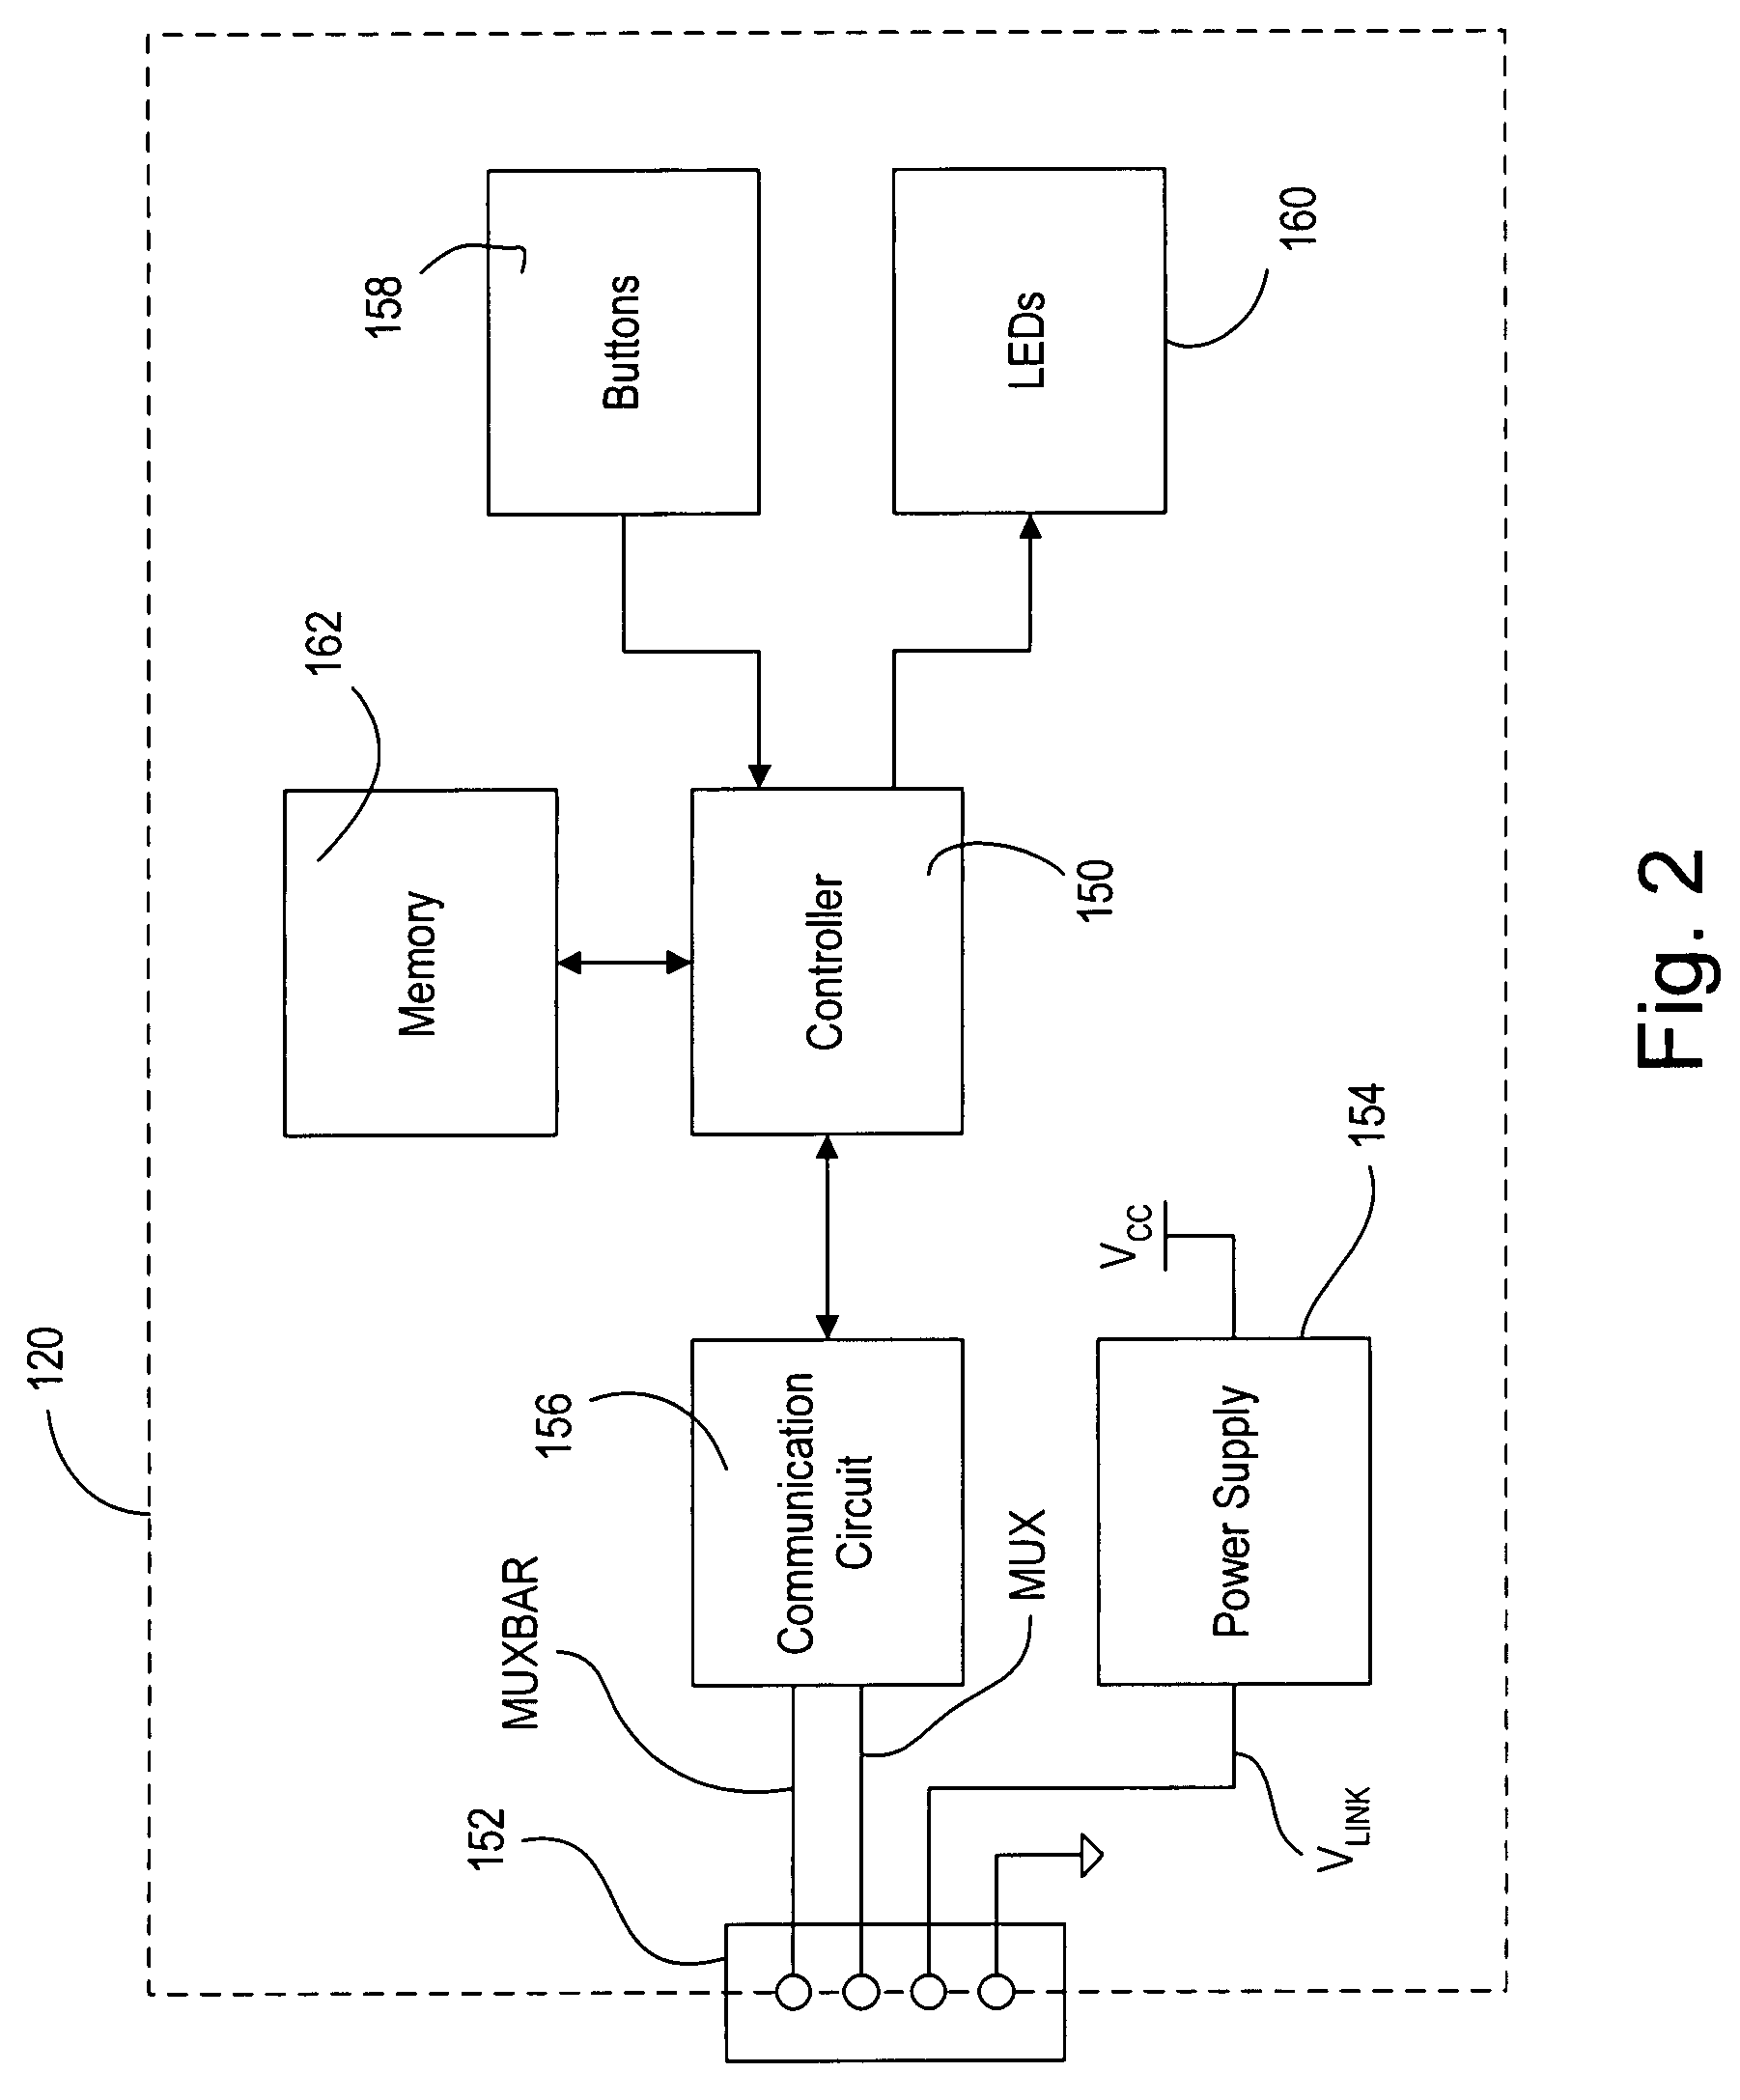 Method of transmitting a high-priority message in a lighting control system